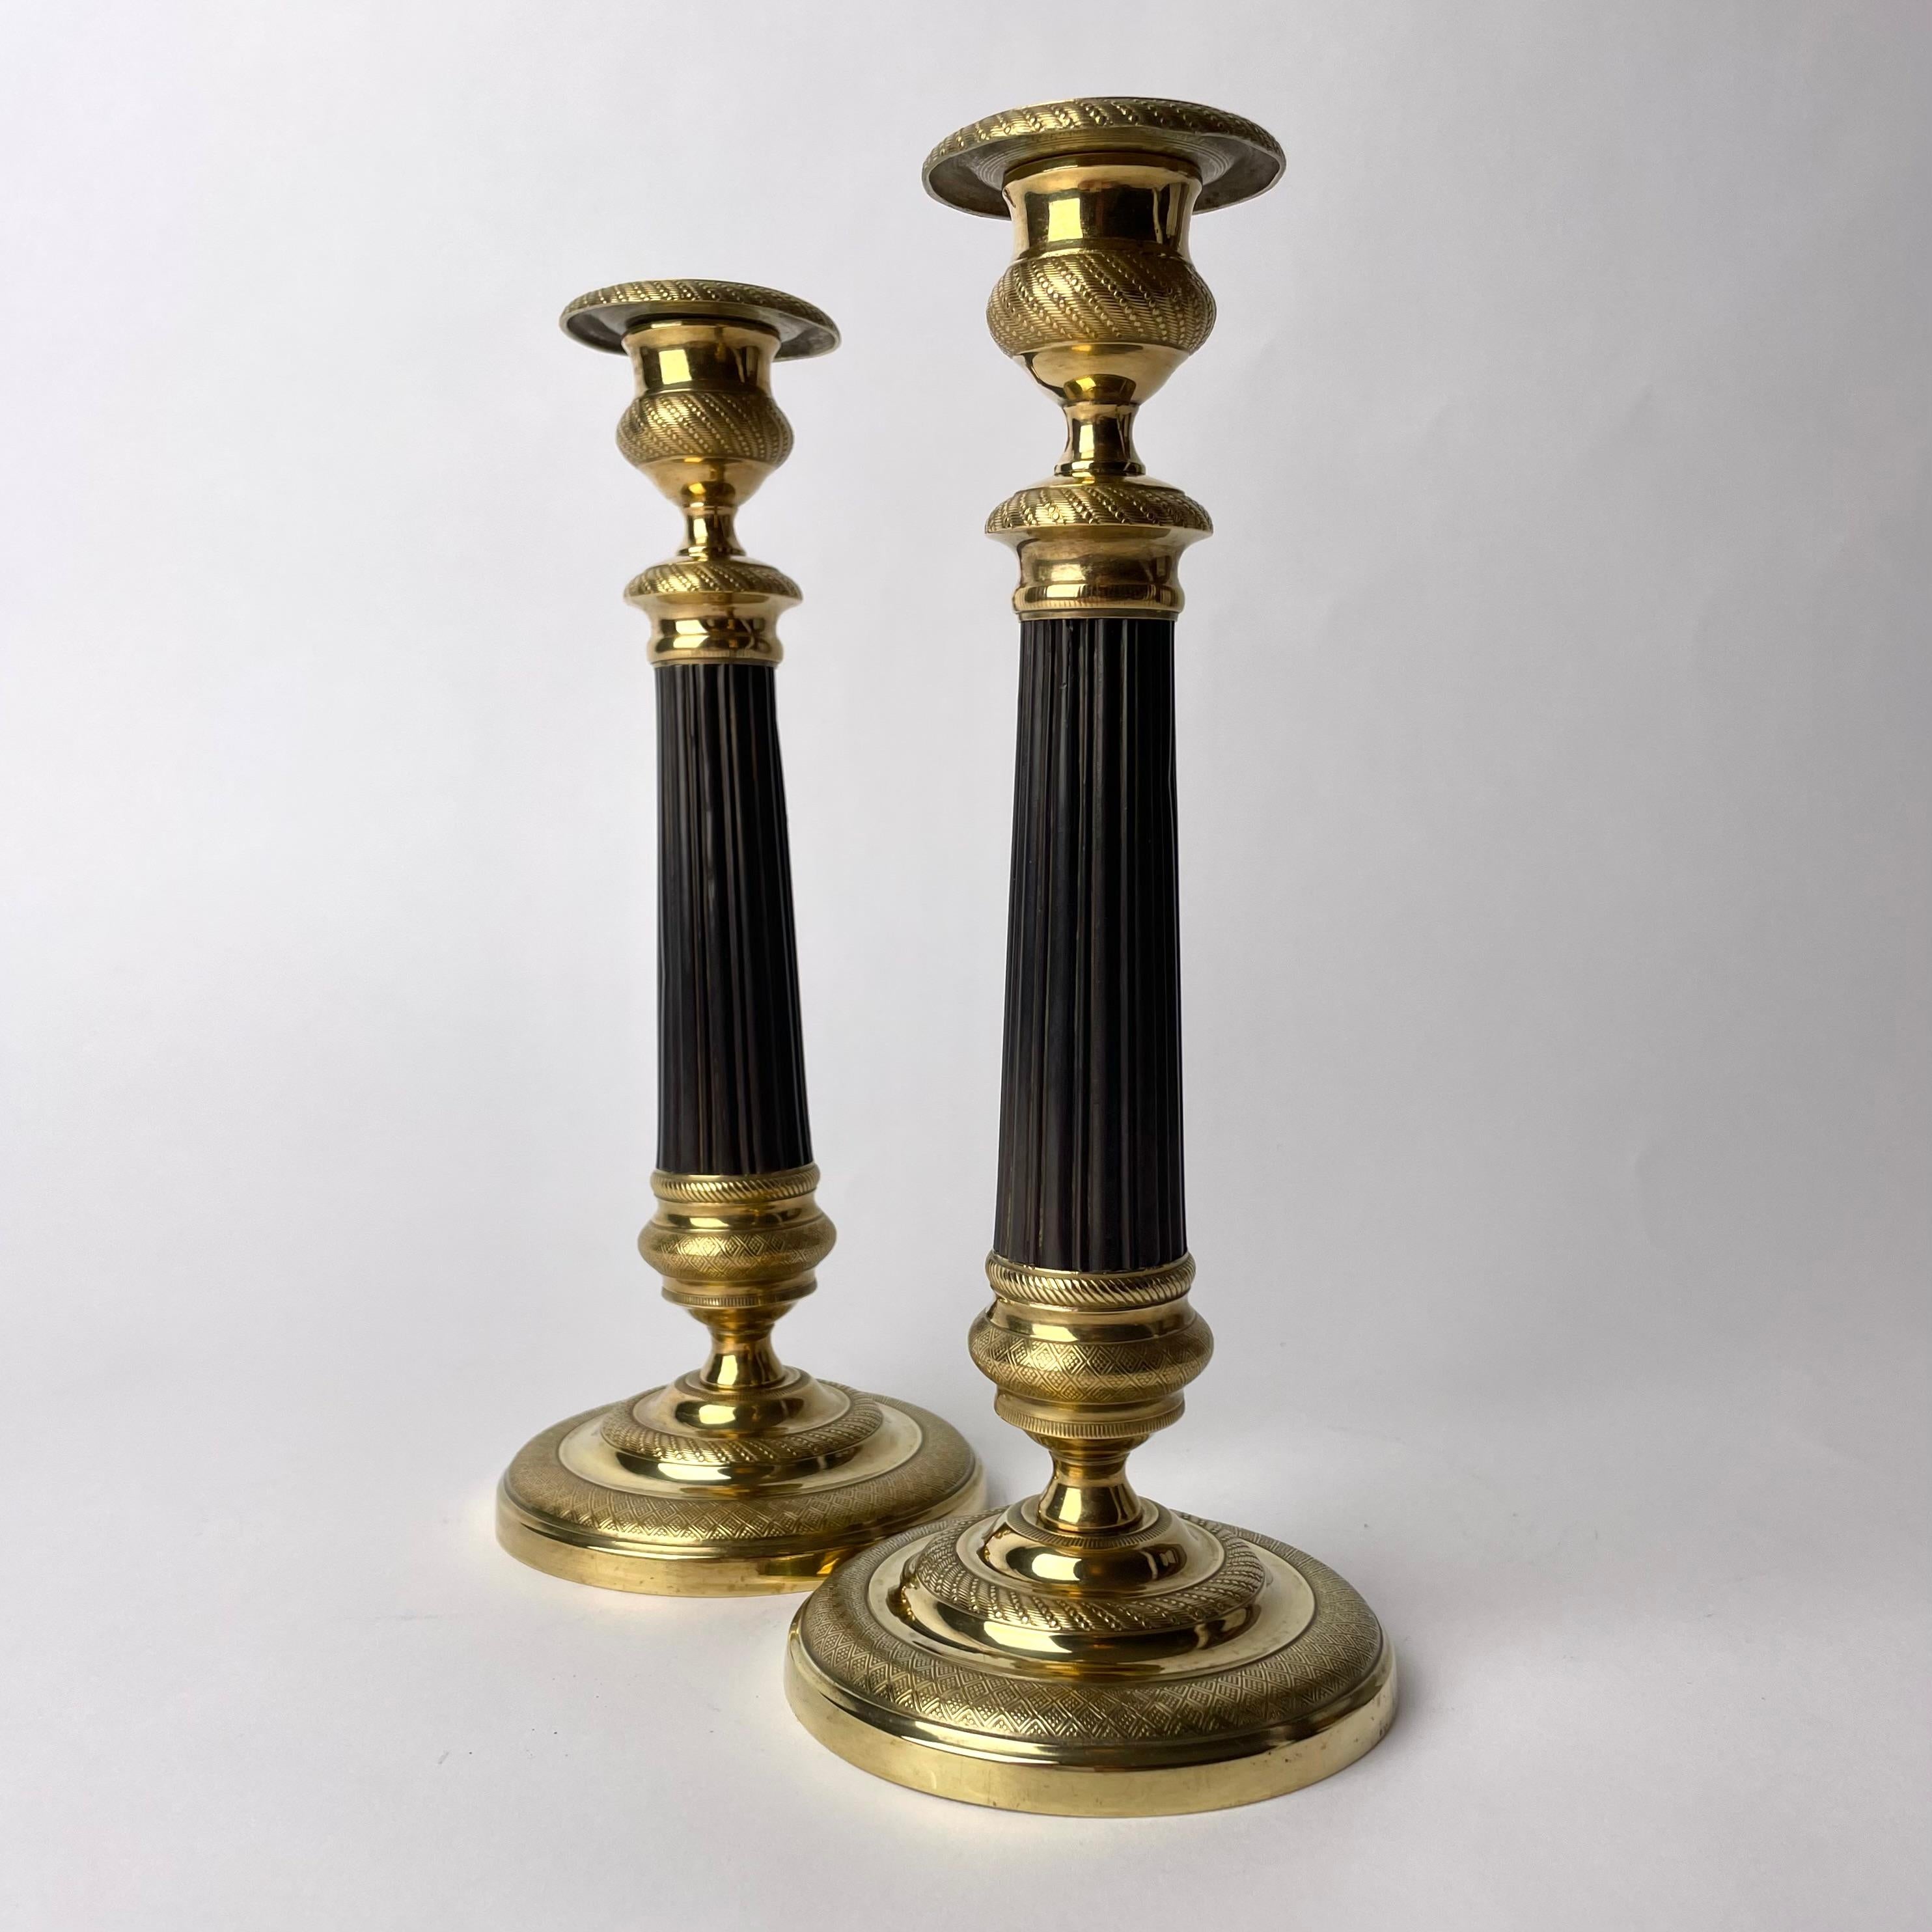 Beautiful pair of Empire Candlesticks in gilt and dark patinated bronze. Made in France during the 1820s. Very period design.

Wear consistent with age and use 